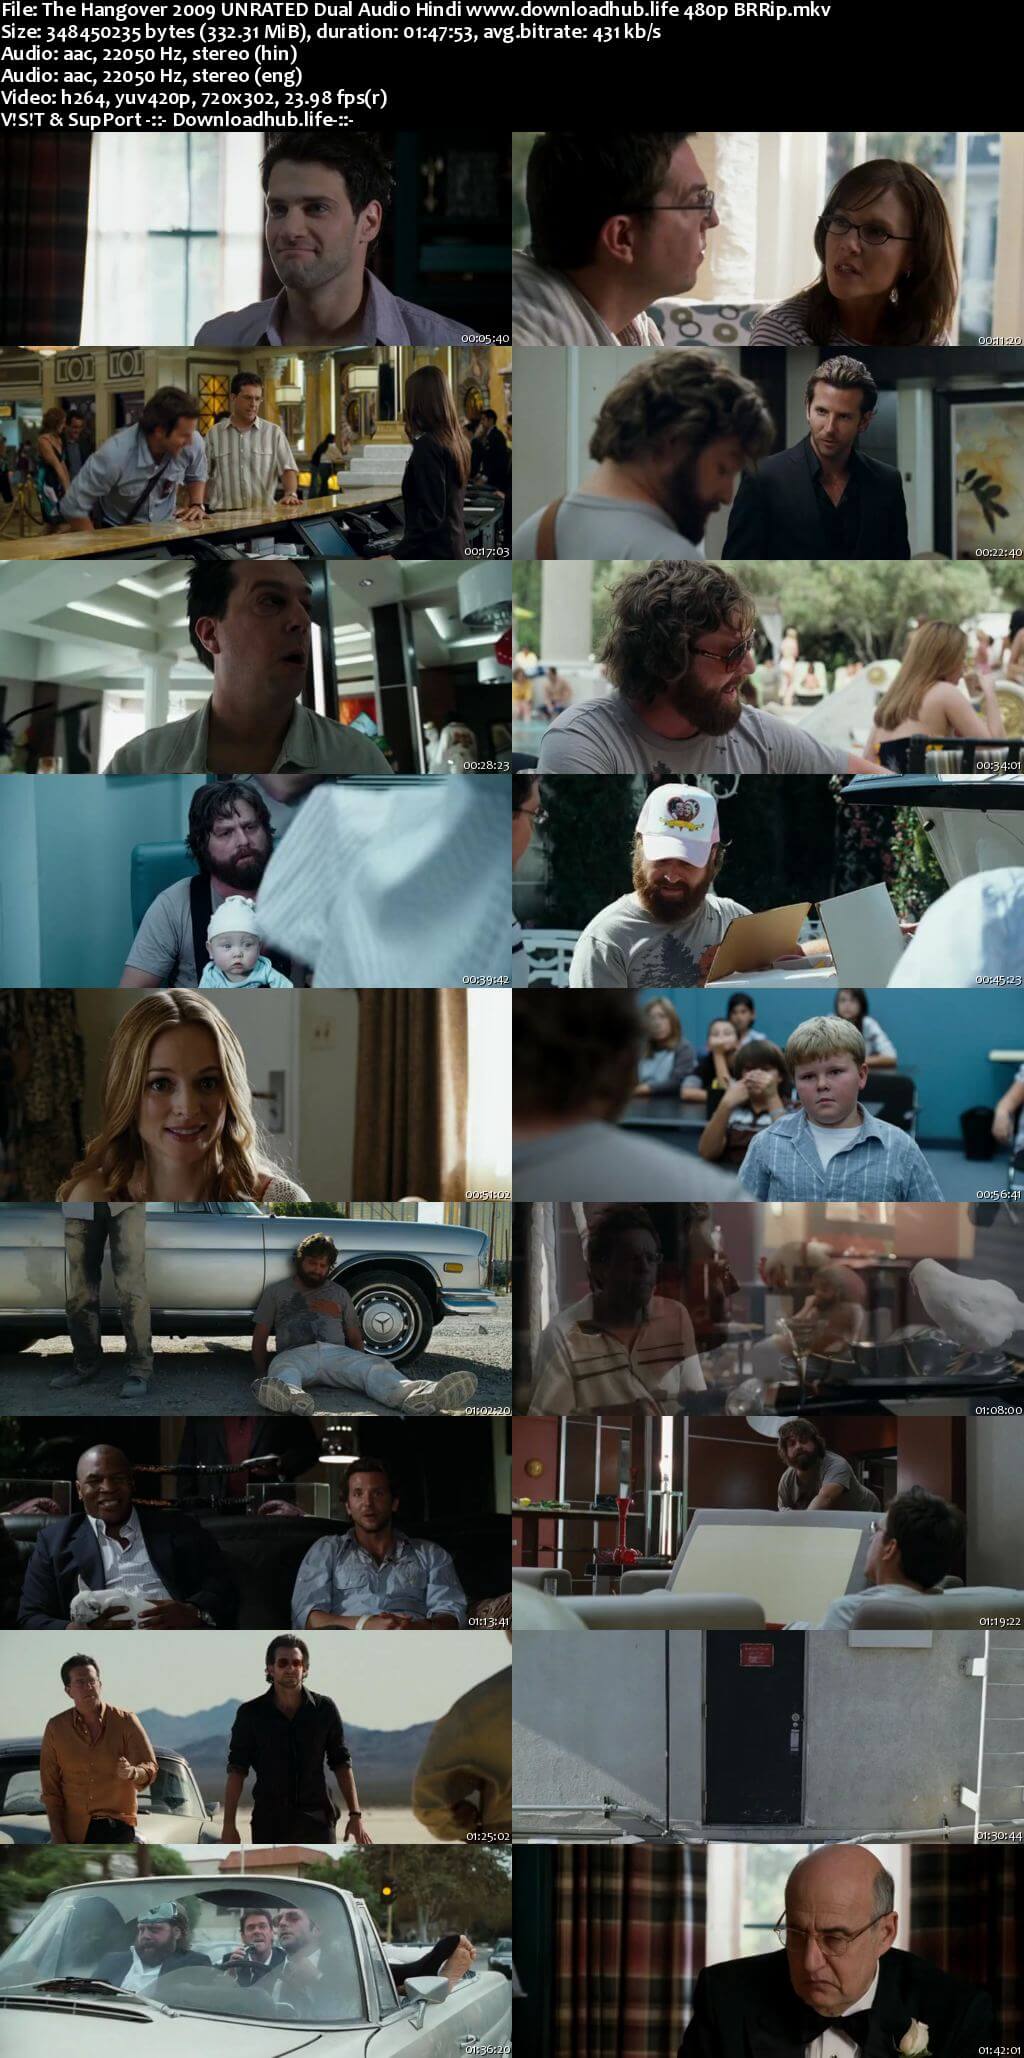 The Hangover 2009 Hindi Dual Audio 300MB UNRATED BluRay 480p